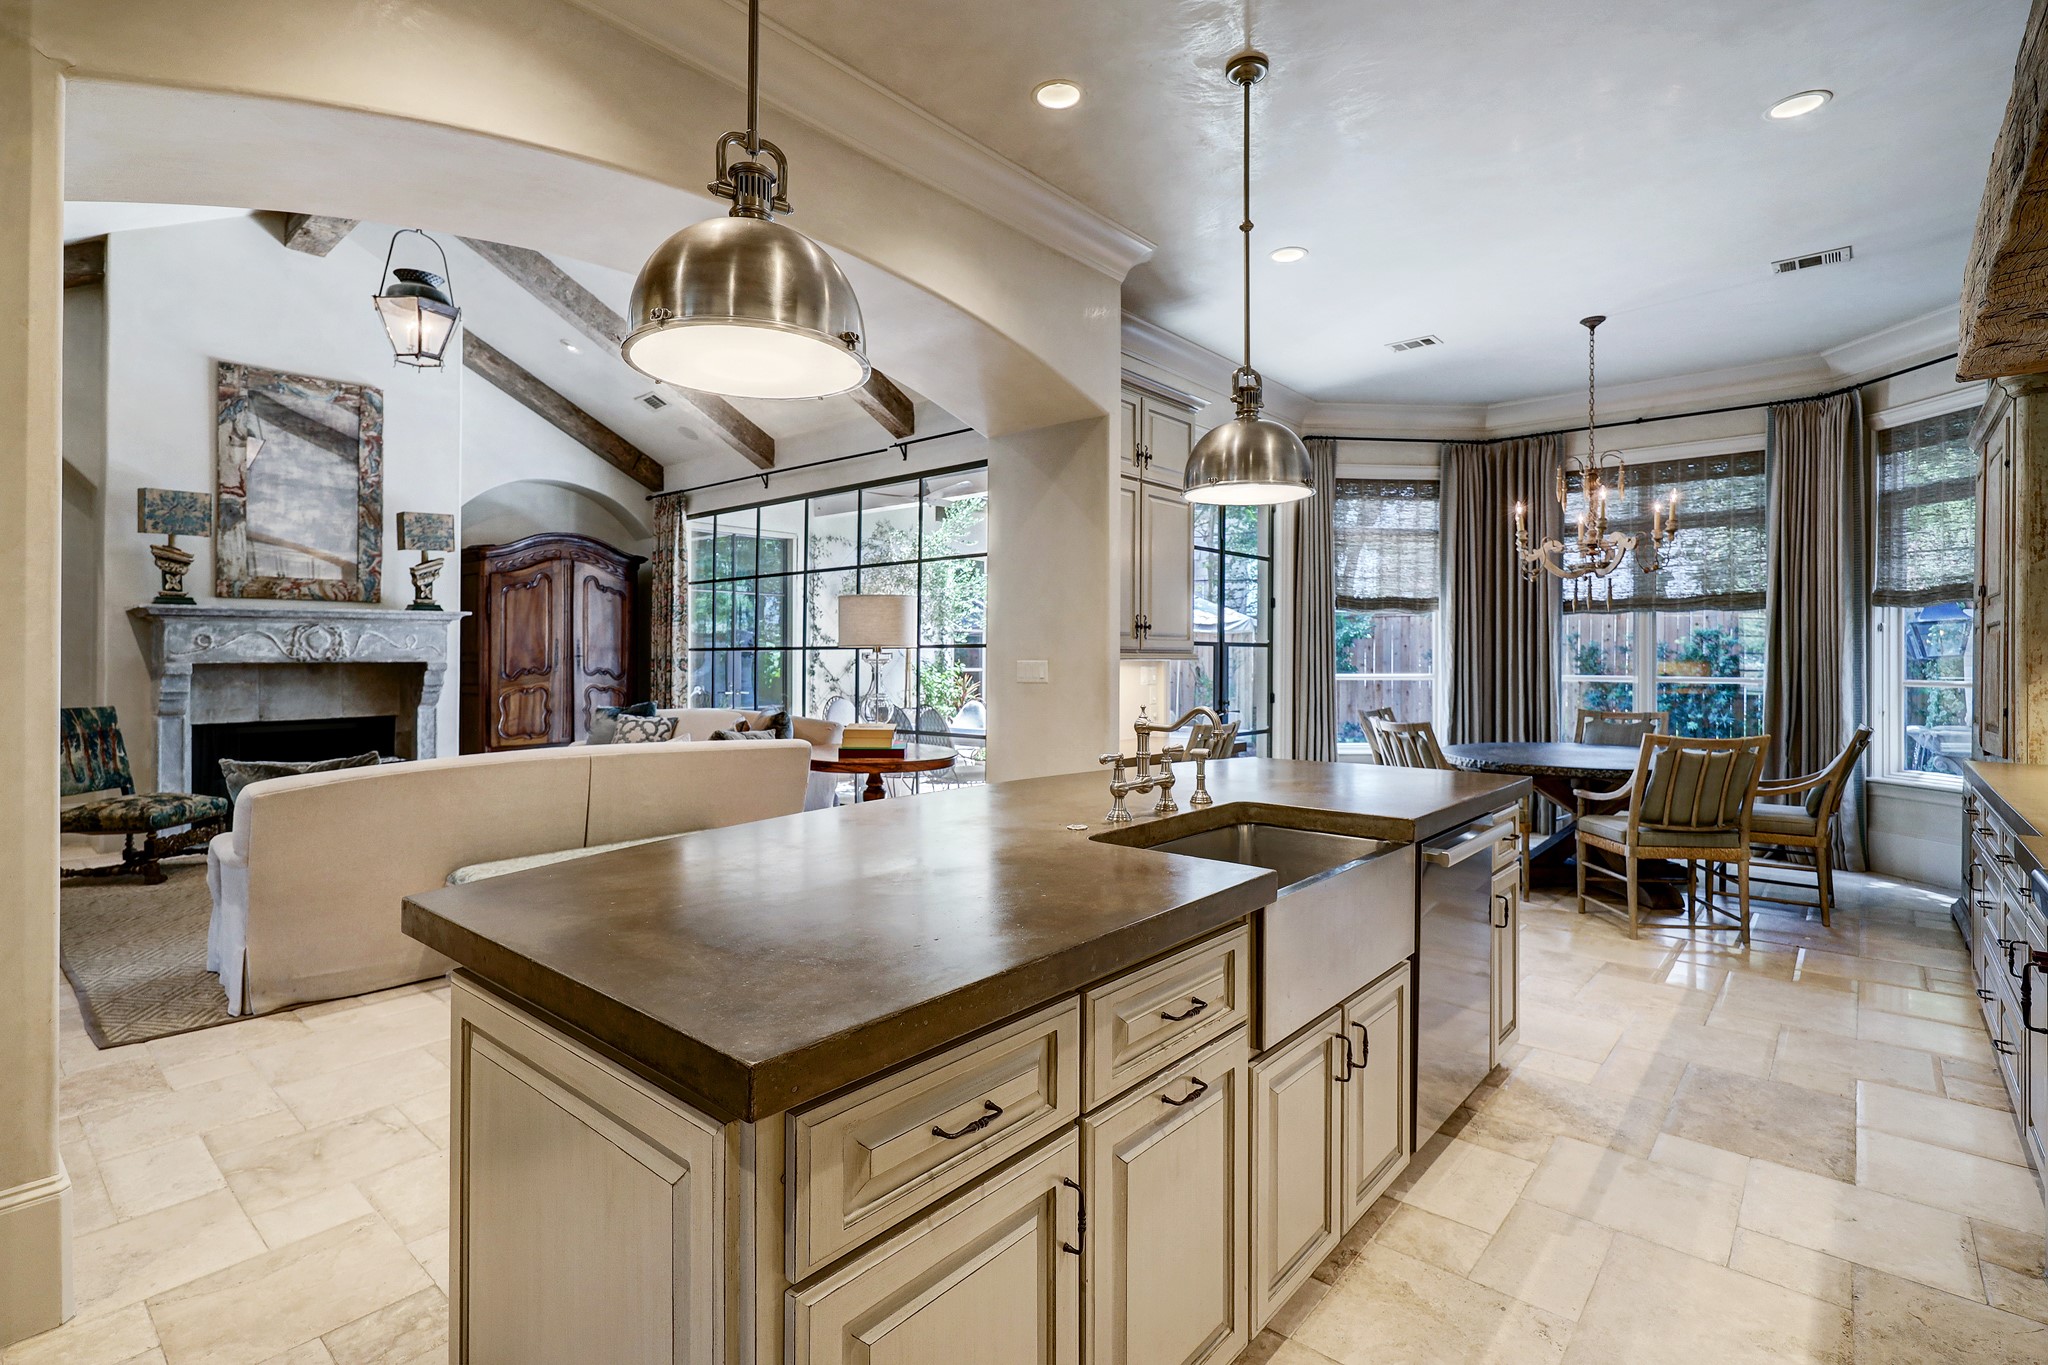 Functionality marries vintage elegance in the form of sleek and robust concrete countertop atop the working island, a stainless steel apron front sink, and yoke pendant lights hanging gracefully overhead, all surrounded by resplendent Segreto paint finishes.